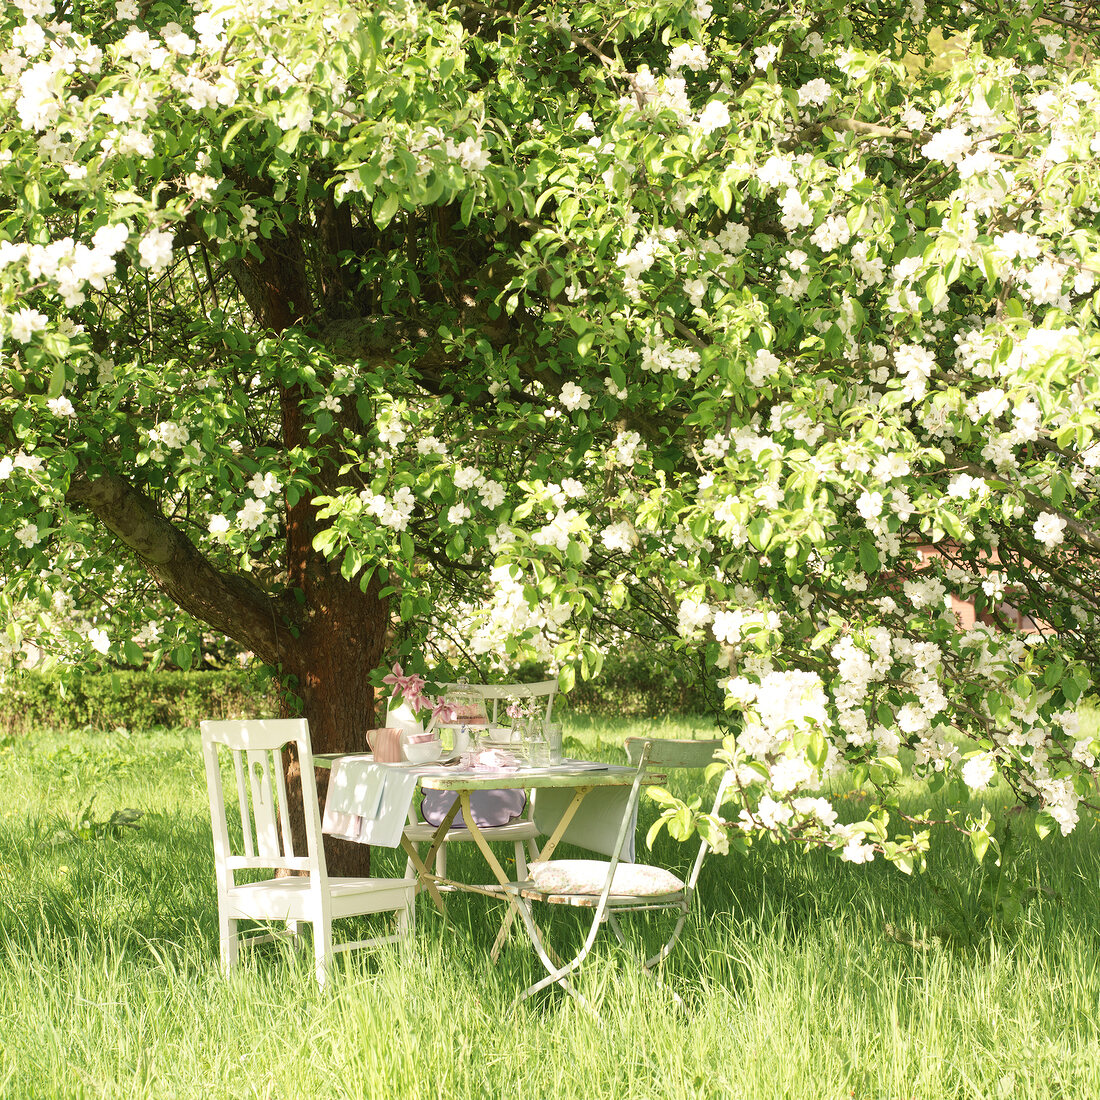 Laid out table in garden under a large blooming apple tree